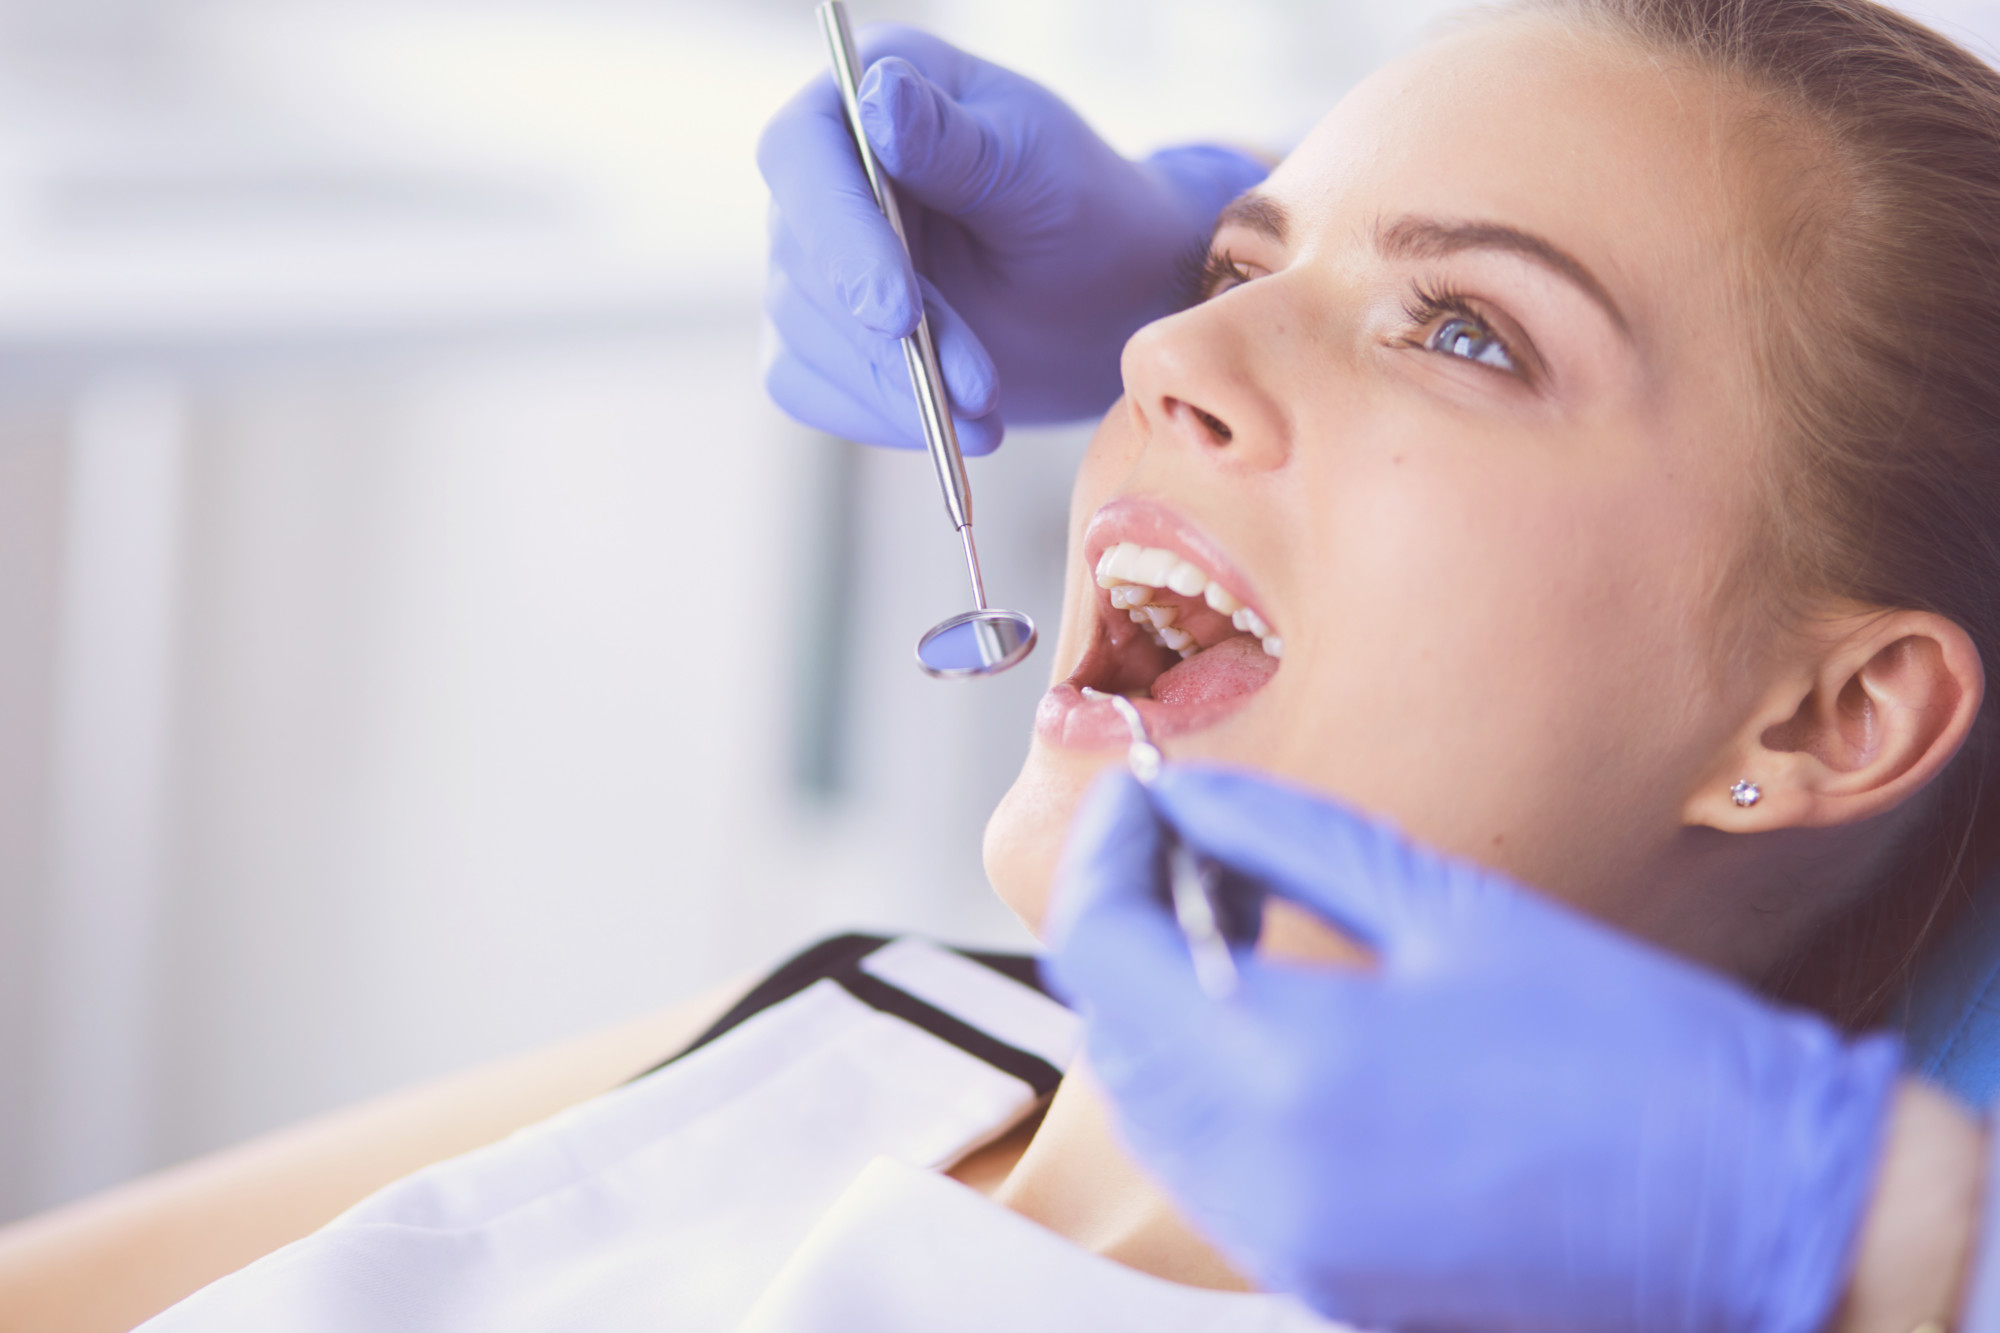 Walk in dentists near me: Do you want to know how to choose the right dentist for you? Read on to learn how to make the right choice.